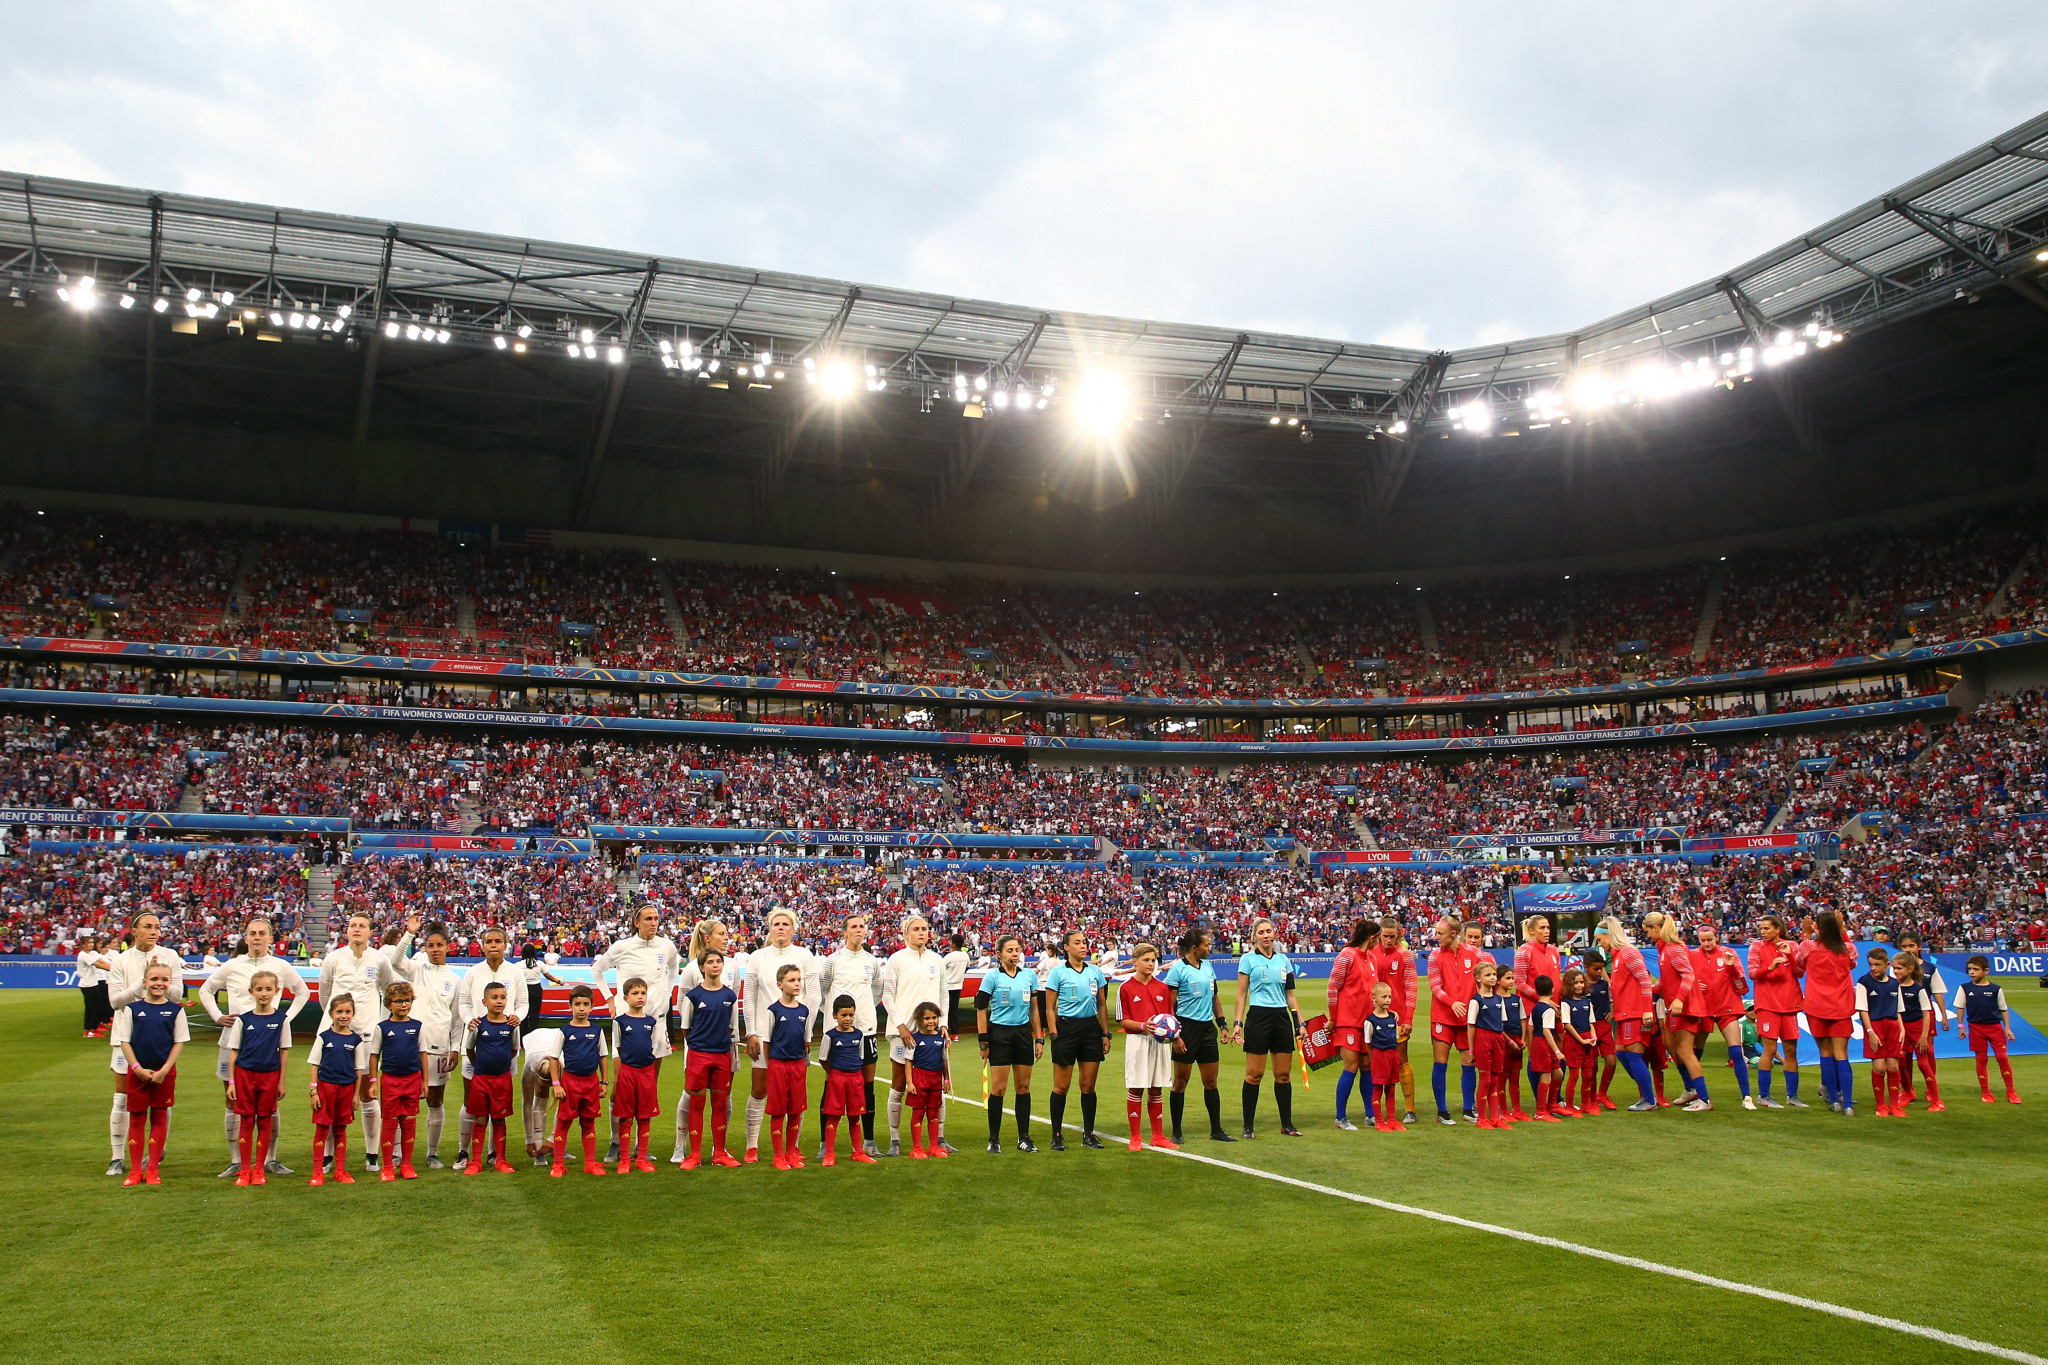 A considerable crowd packed into the Stade de Lyon for the first Women's World Cup semi-final ©Getty Images